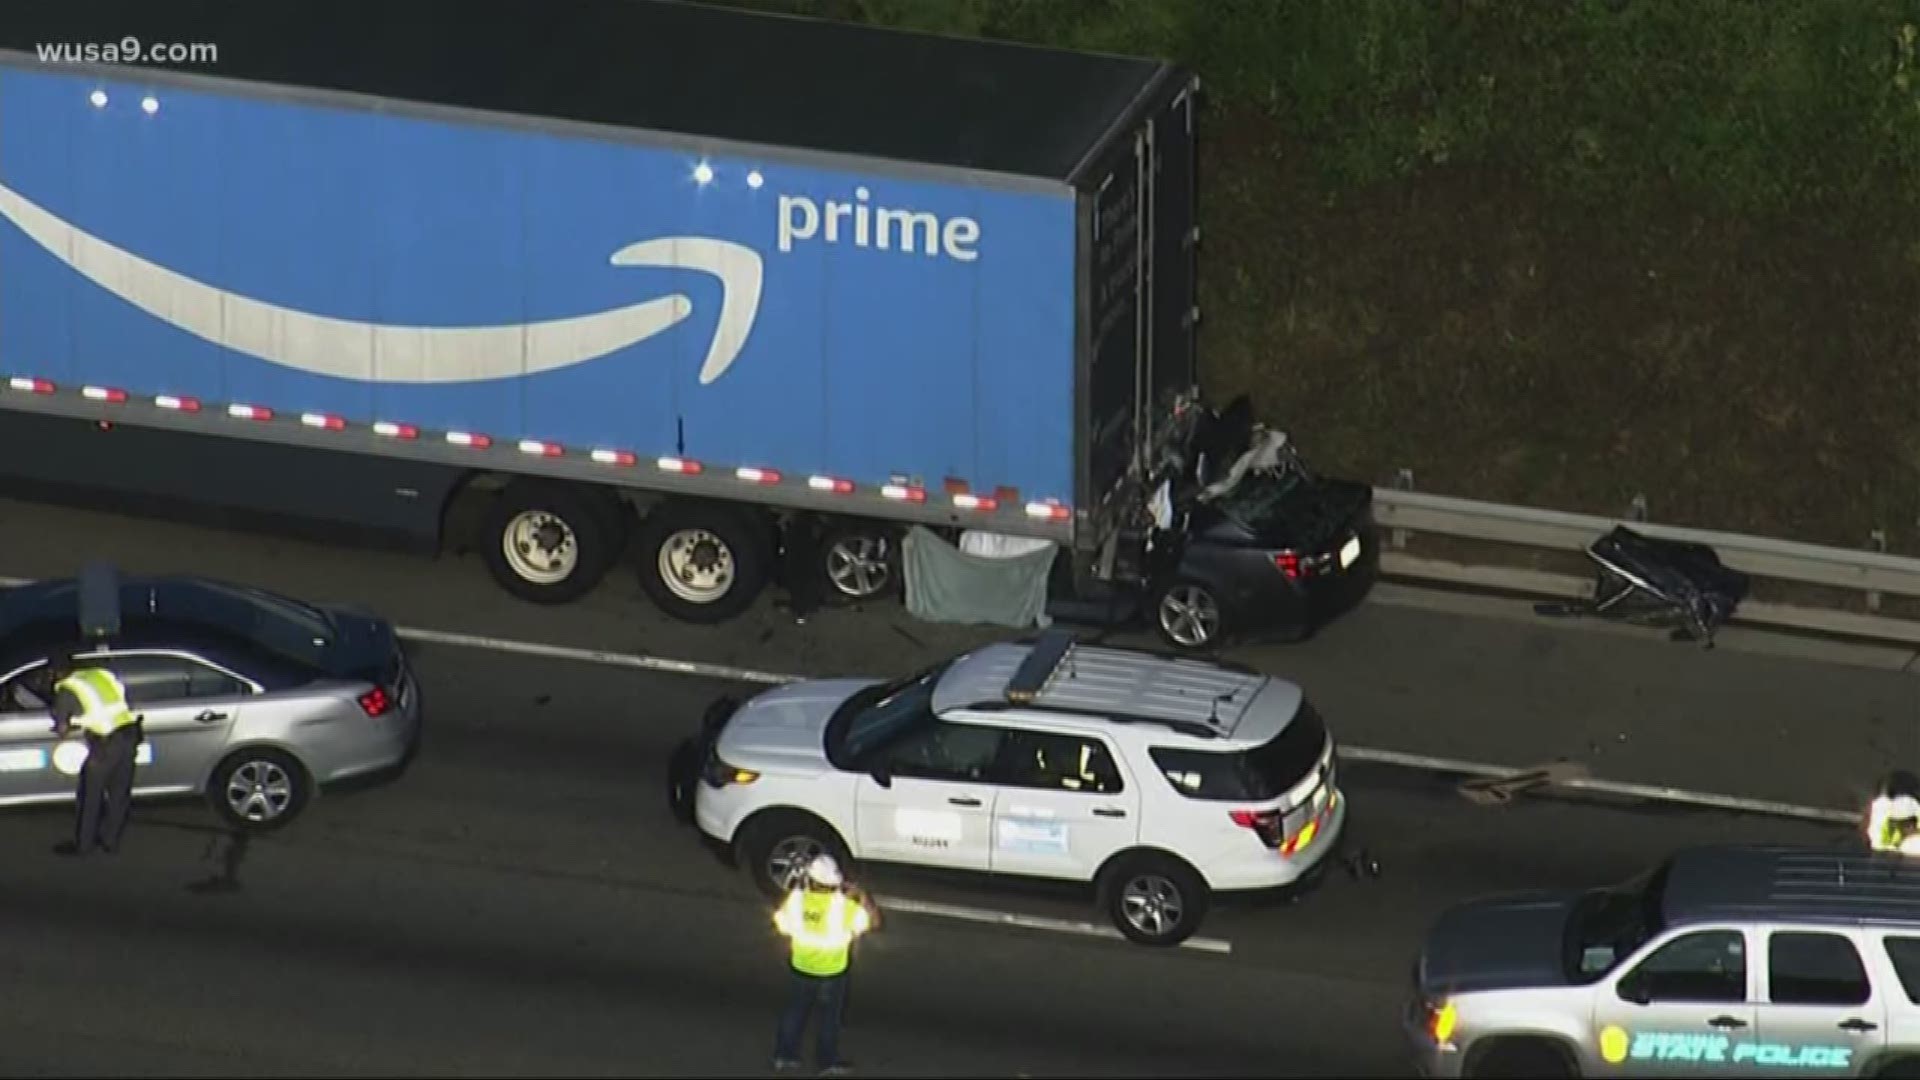 Driver Dies After Car Goes Under Amazon Prime Tractor Trailer In Virginia Wusa9 Com